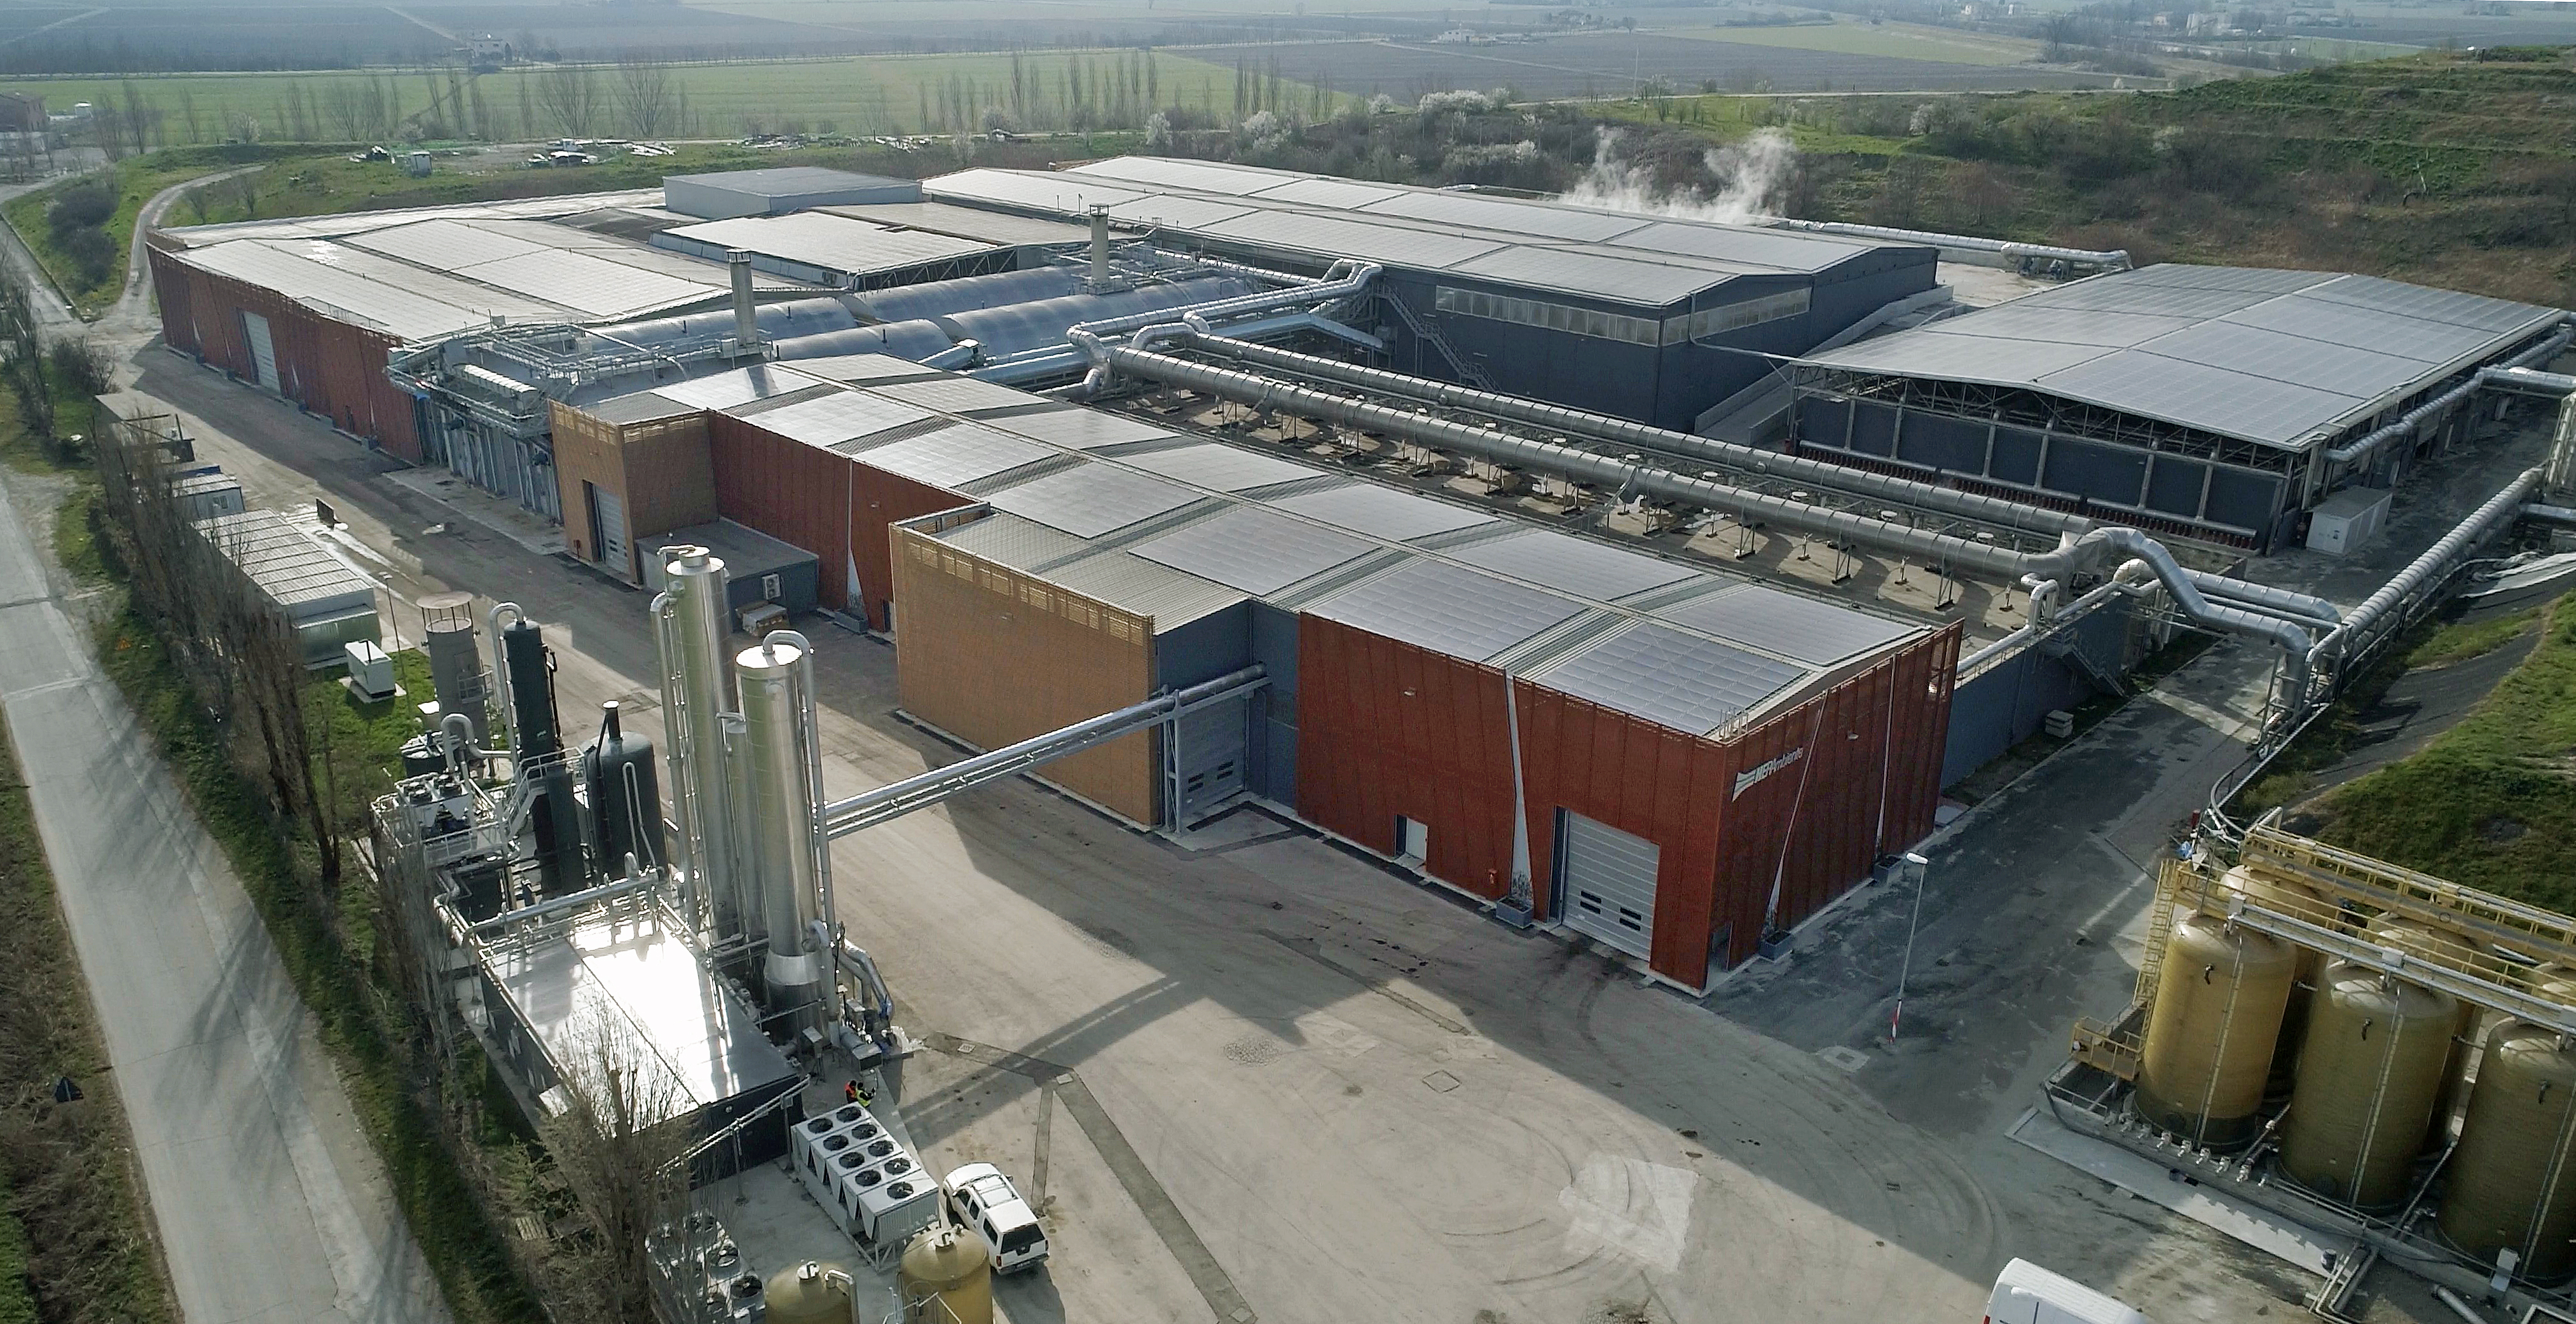 View of Composting, anaerobic digestion and biomethane production plant in Sant'Agata Bolognese (Bologna)